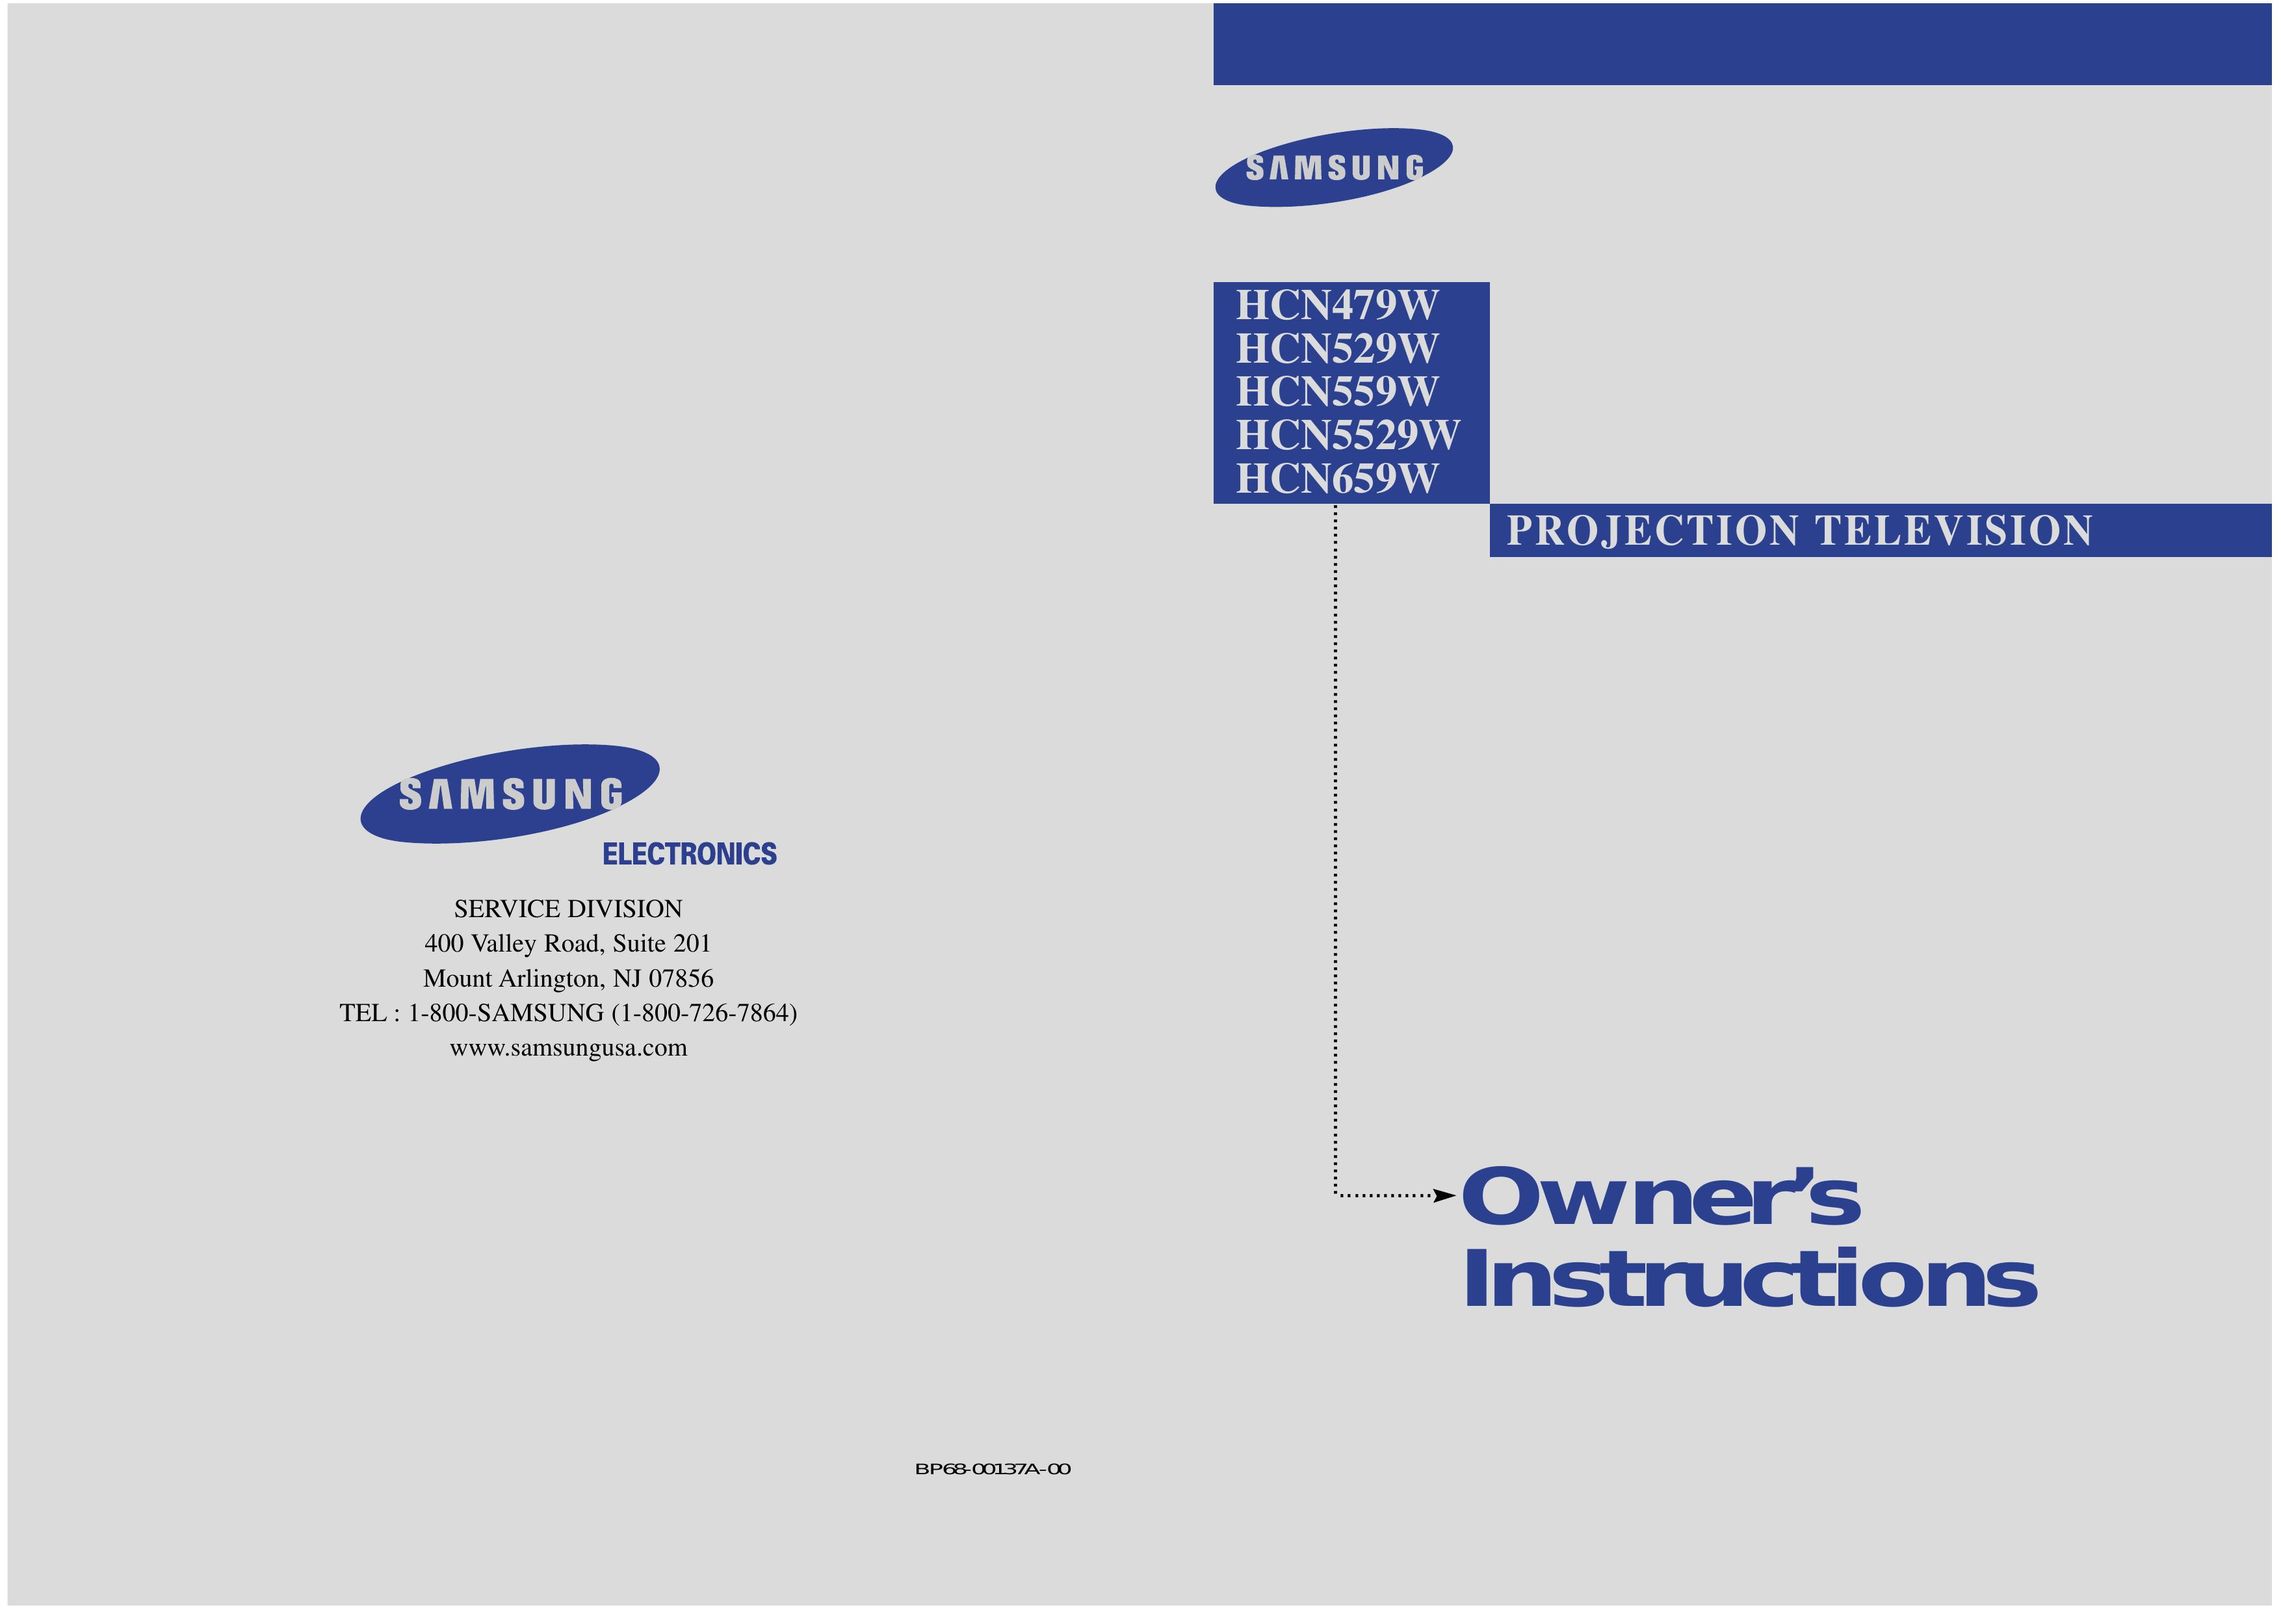 Samsung HCN479W Projection Television User Manual